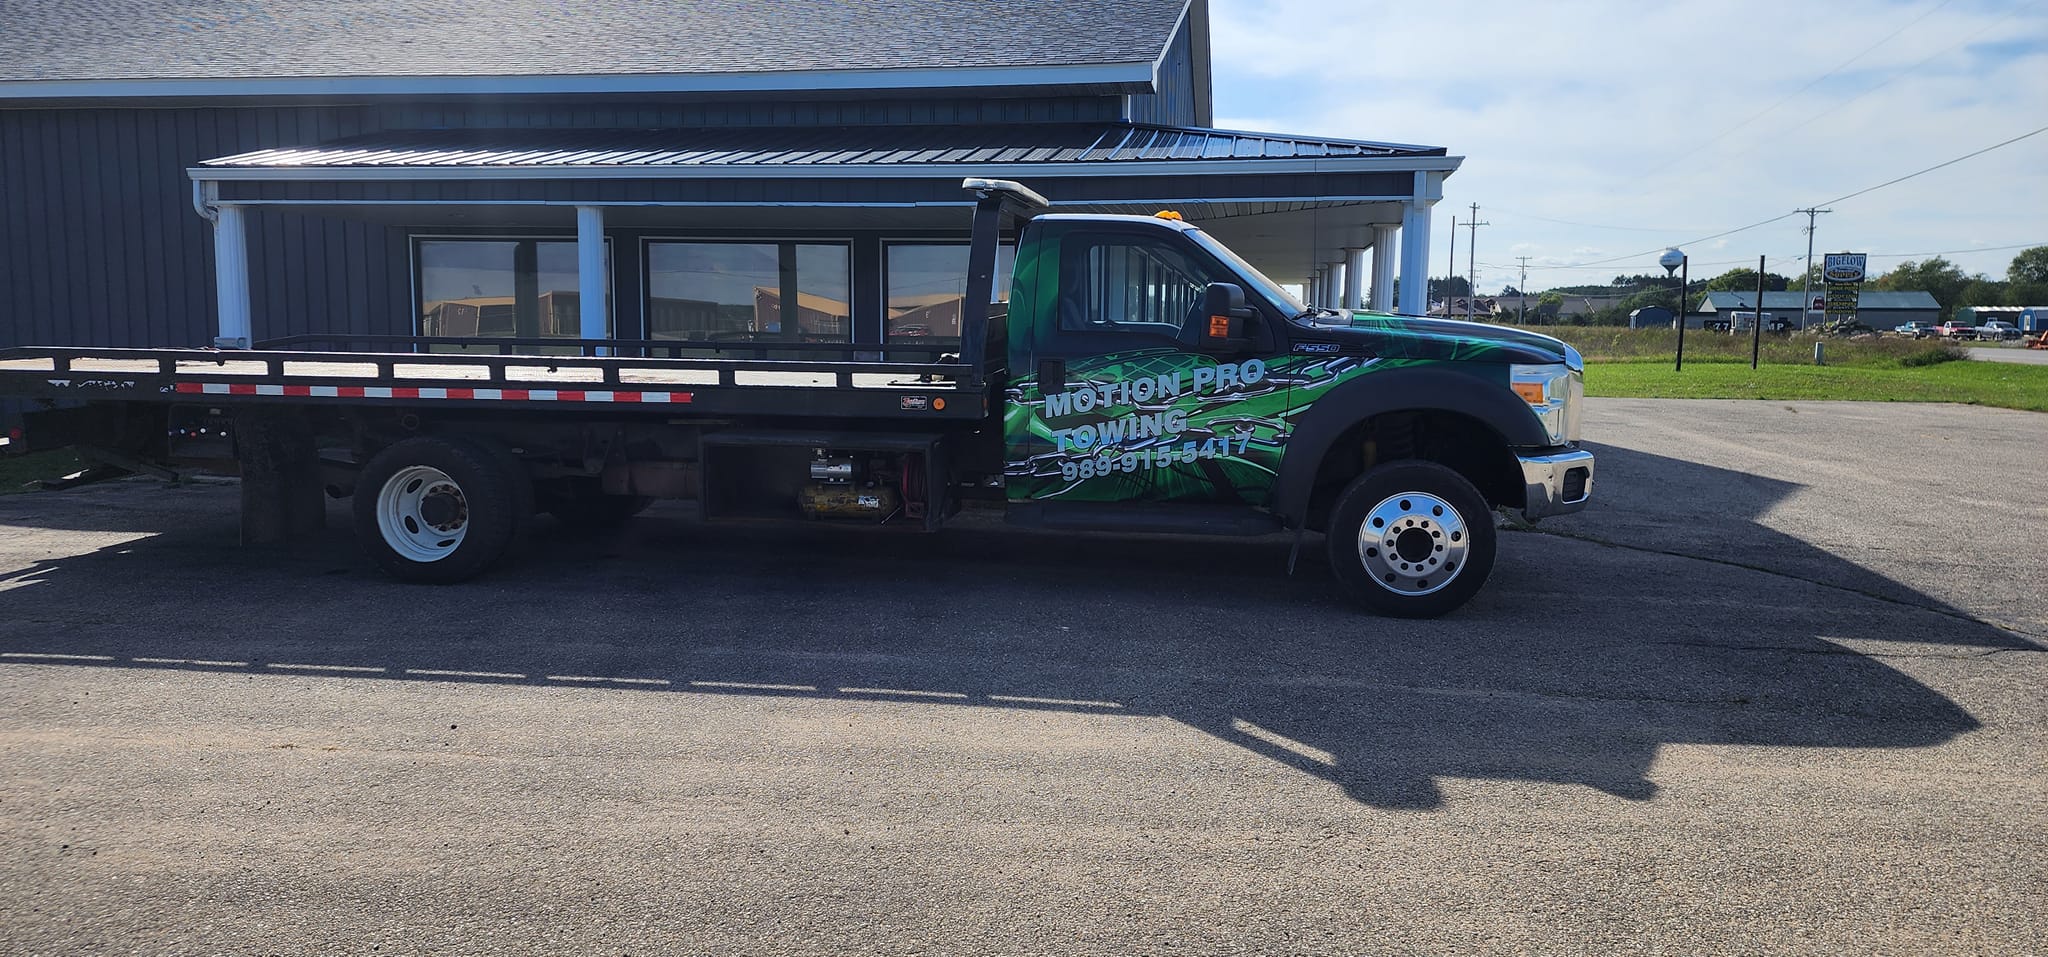 MOTIONPRO PERFORMANCE AND TOWING LLC